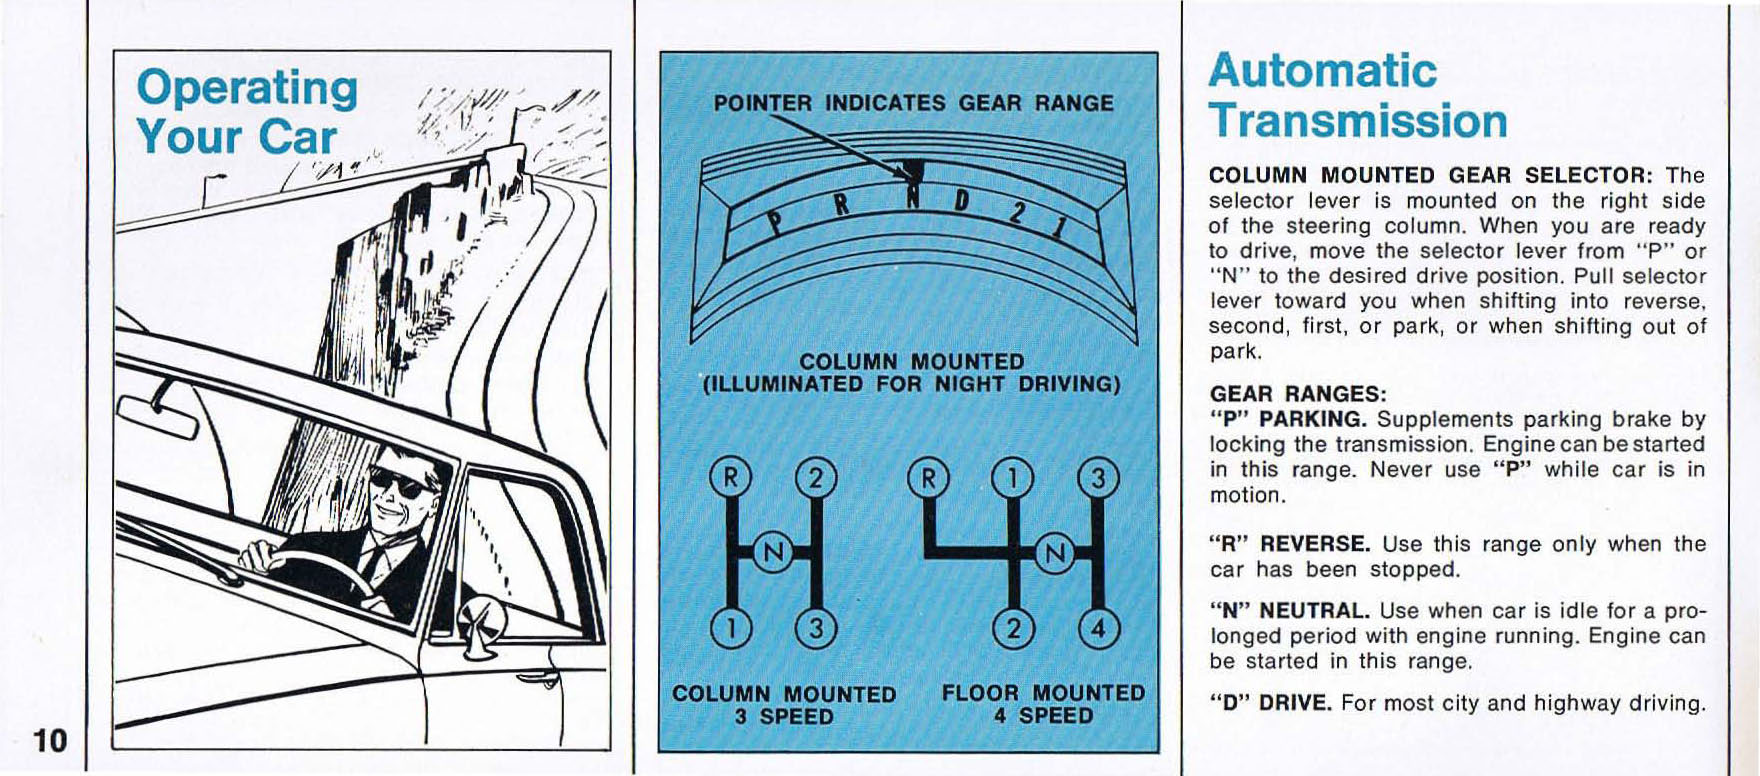 1969_Plymouth_Valiant_Owners_Manual-10